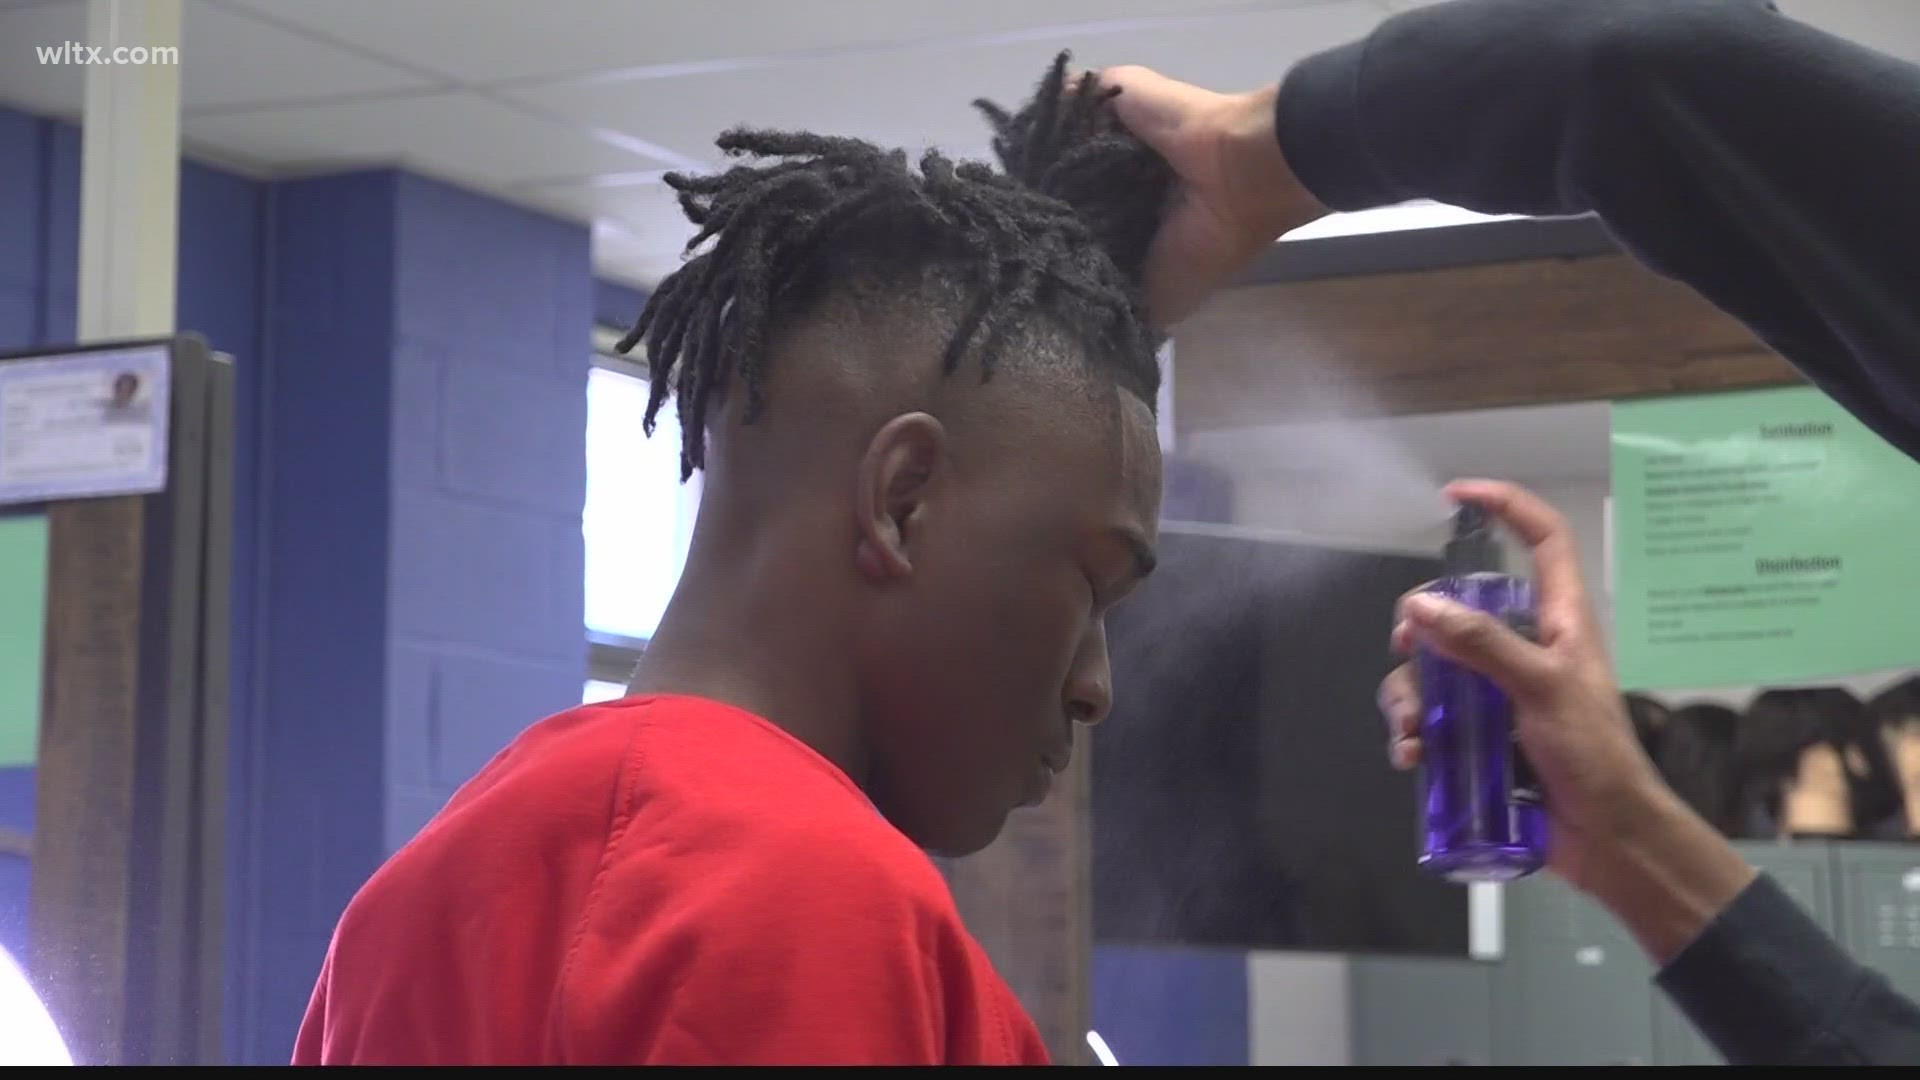 Heyward Career and Tech school barber students don't have equipment to take home.  They can't practice.  The community is helping them get what they need.